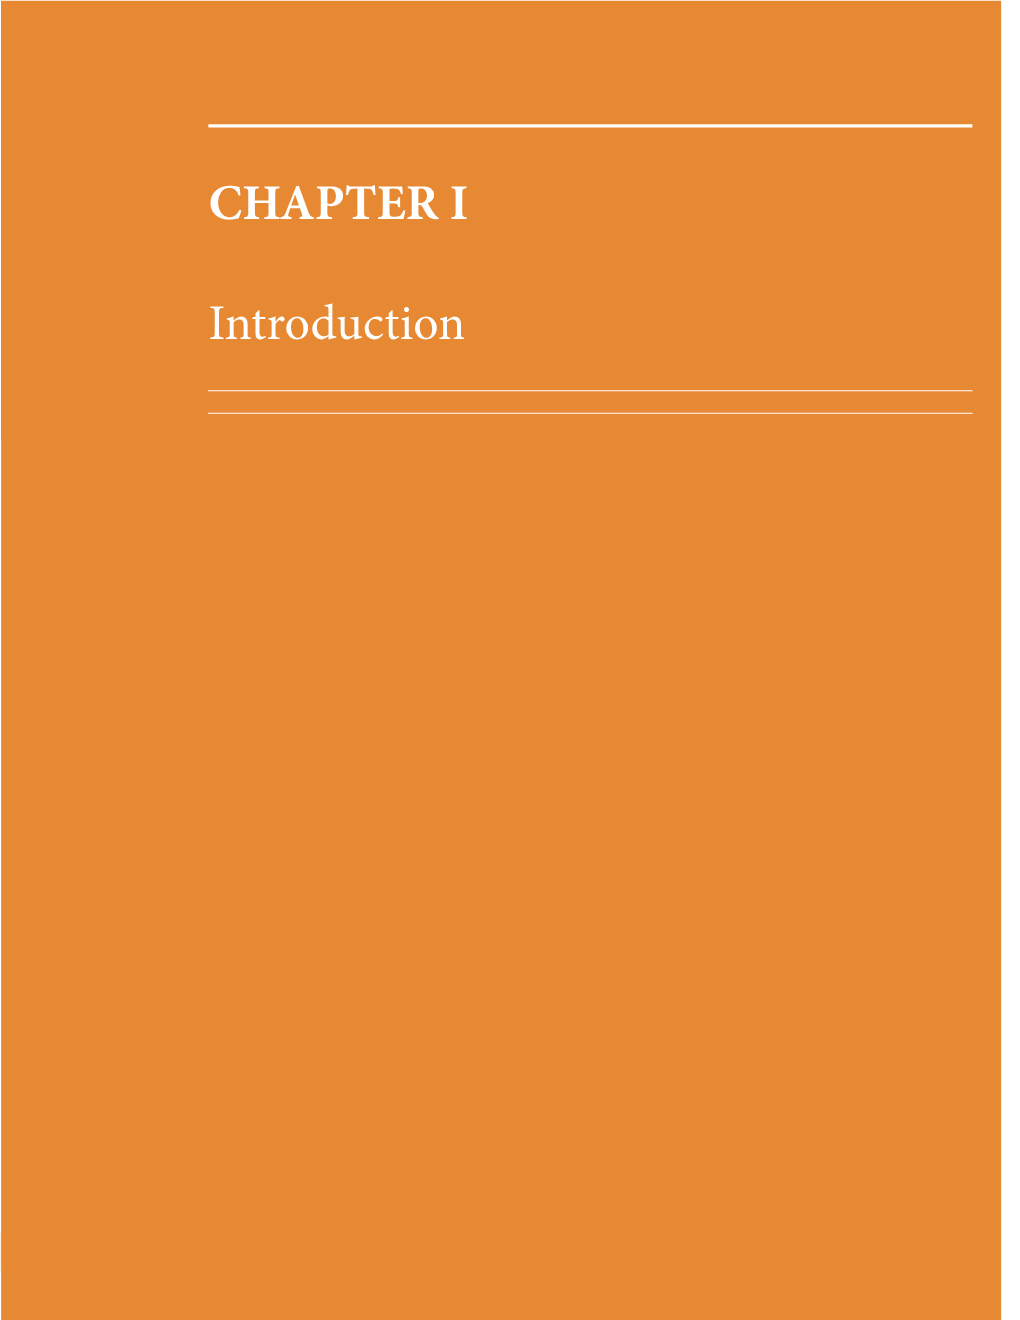 CHAPTER I Introduction